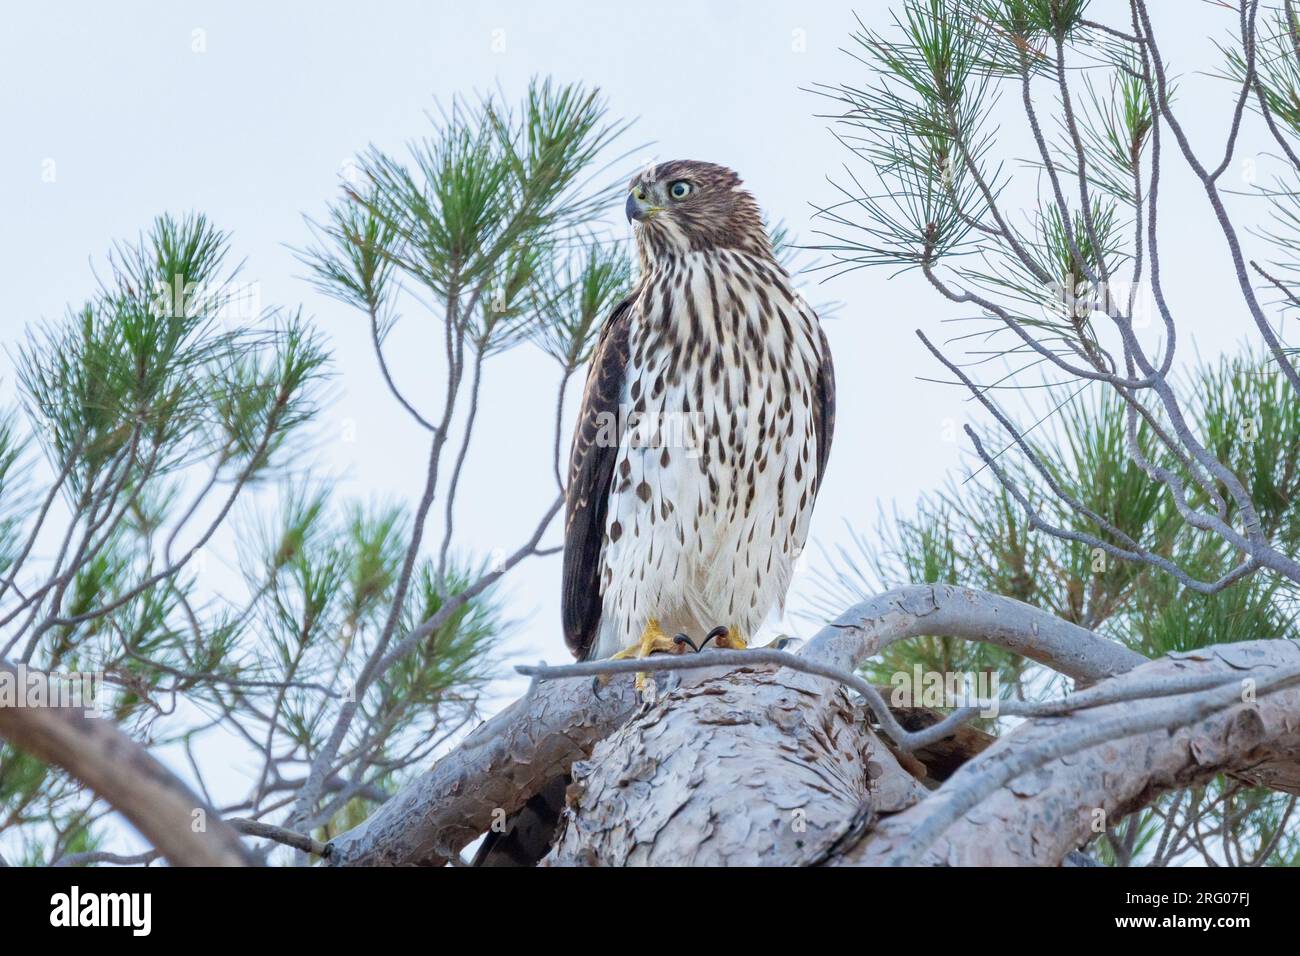 An immature Cooper's hawk (Accipiter cooperii) sits on a branch. Stock Photo